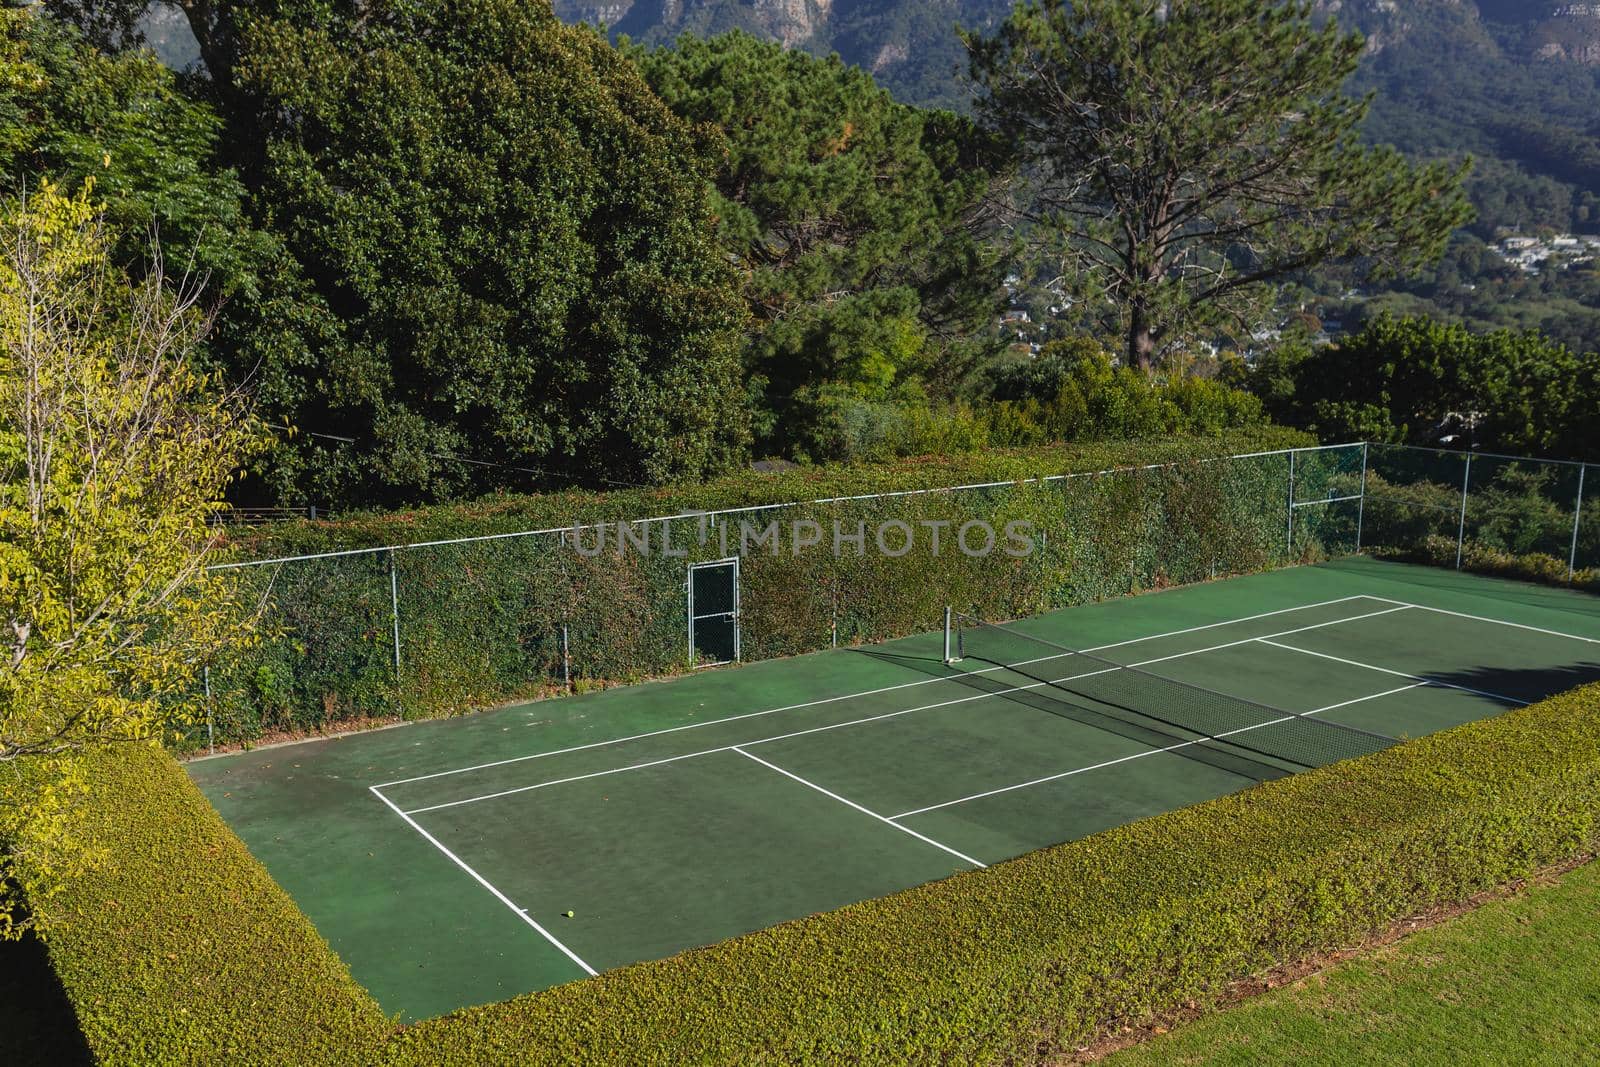 General view of tennis court in stunning countryside on sunny day. retreat, leisure time facilities and active lifestyle concept.